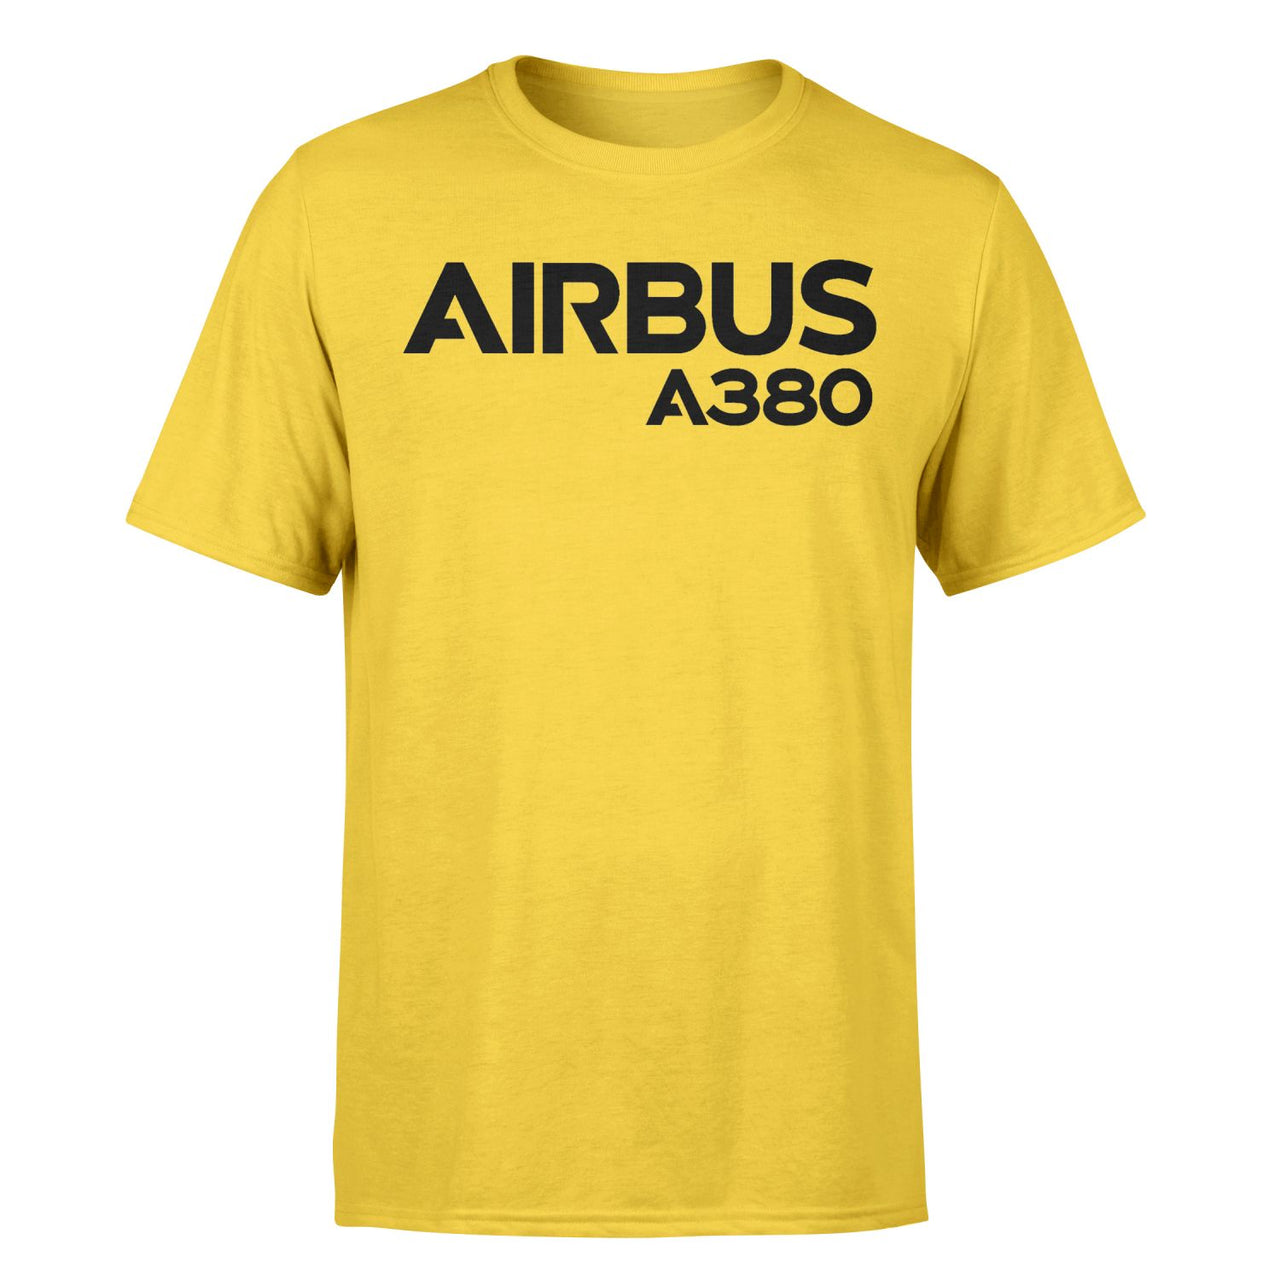 Airbus A380 & Text Designed T-Shirts